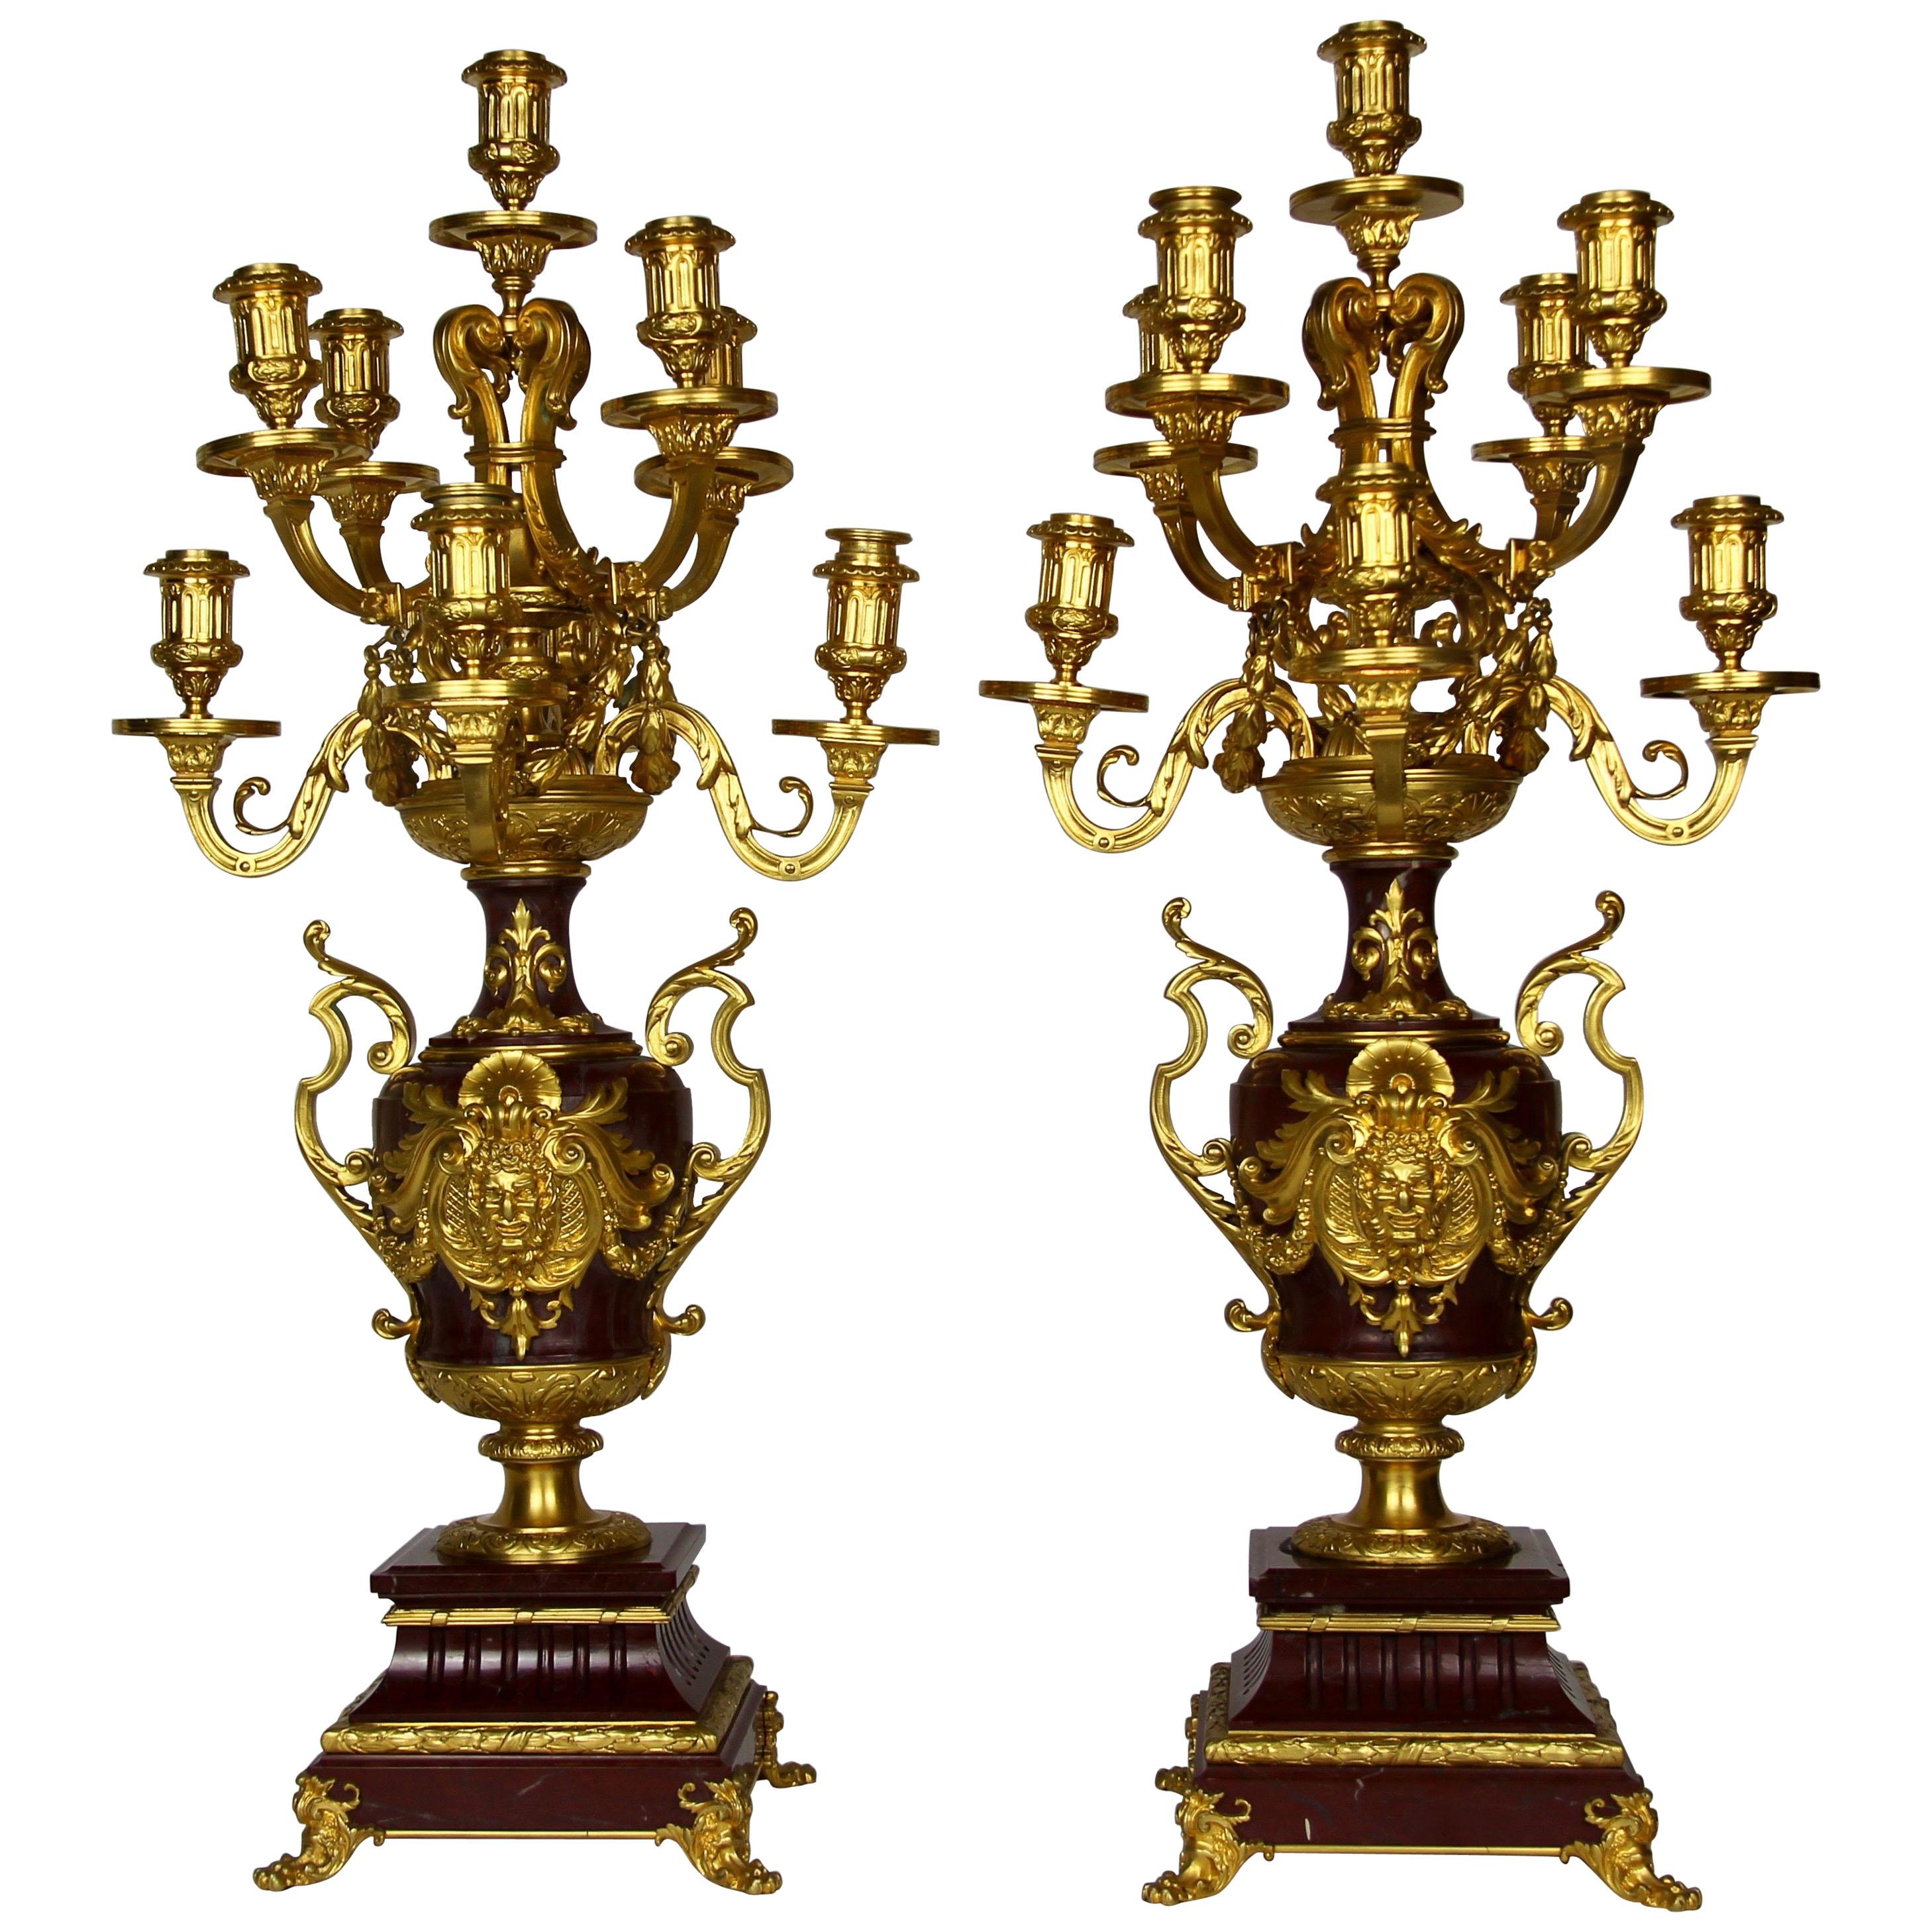 Pair of Doré Bronze Mtd Rouge Marble 9-Arm Candelabras, Signed by Barbedienne